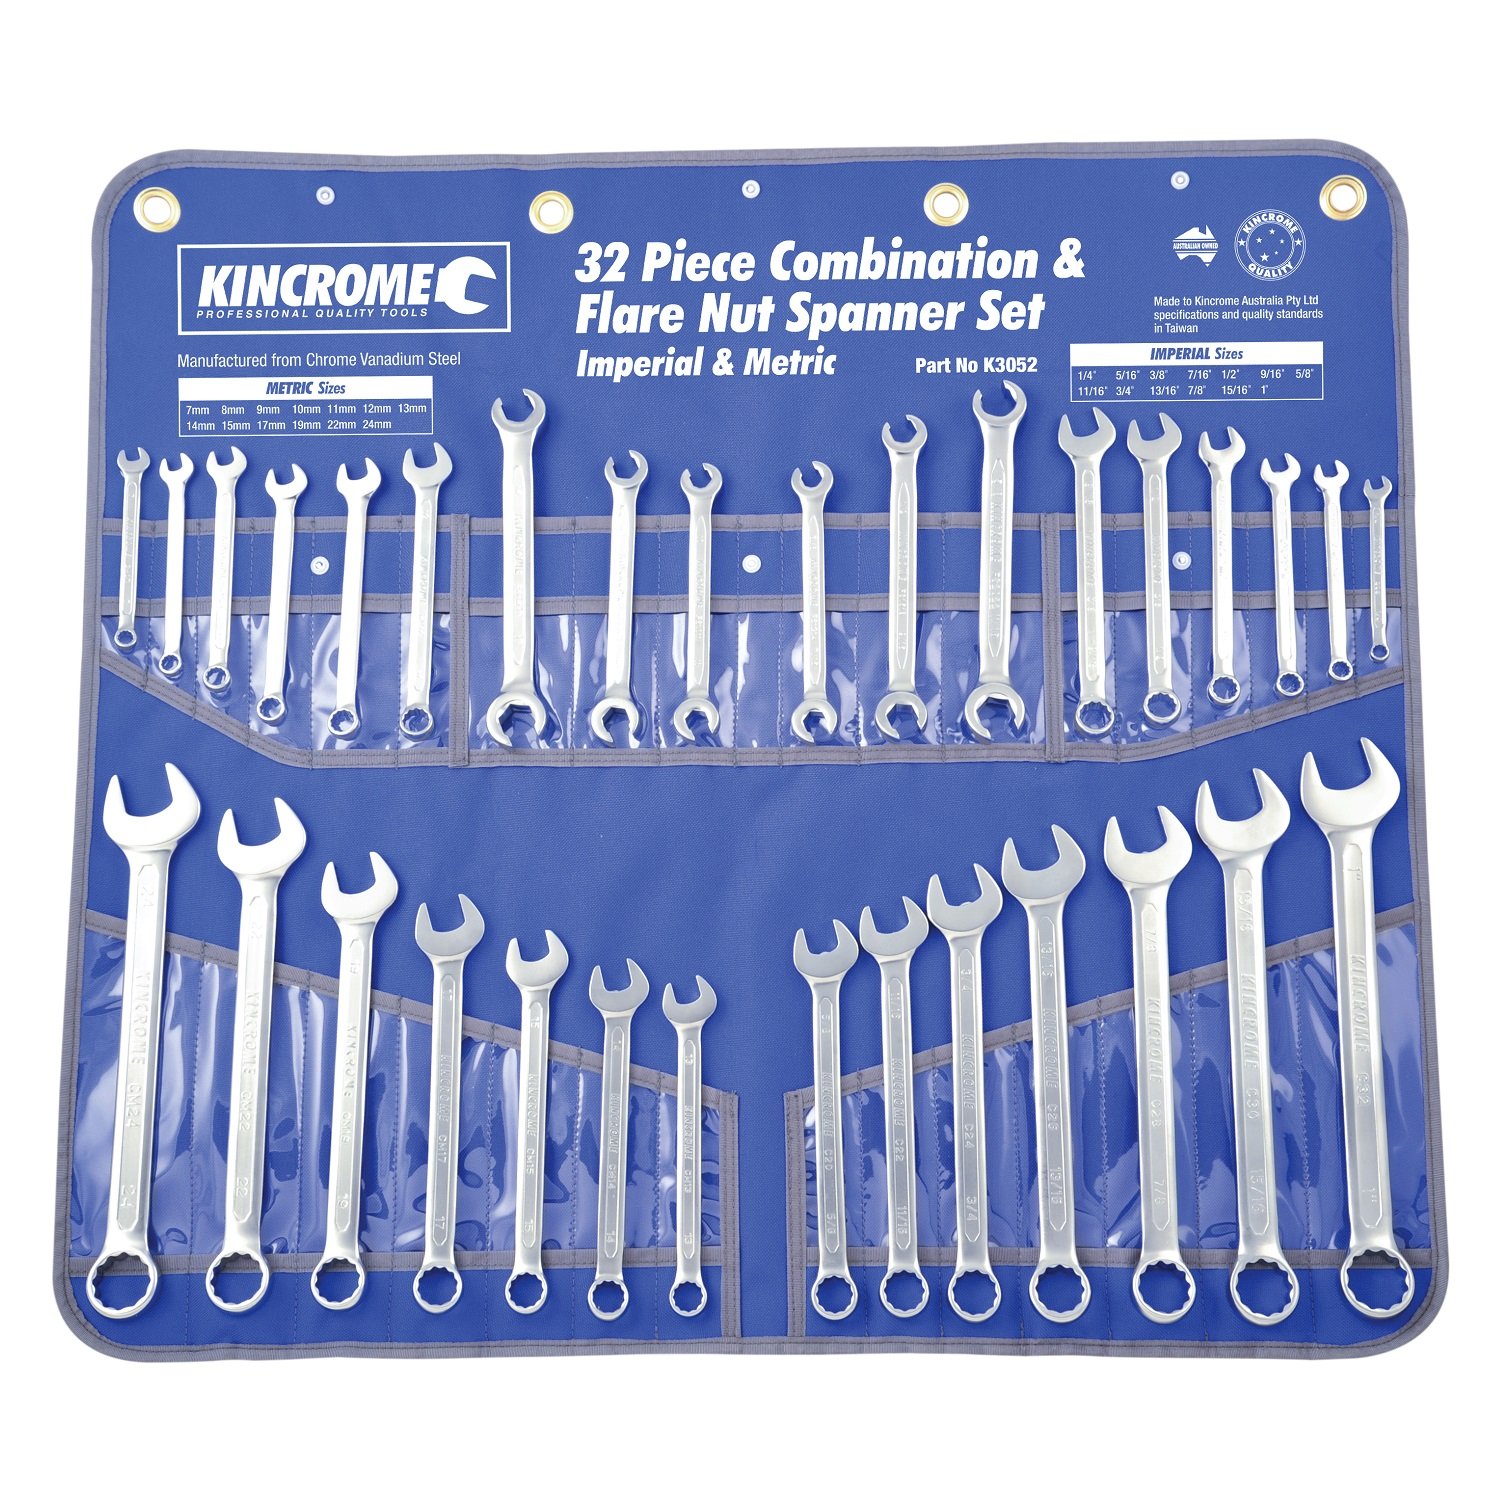 Kincrome Combination & Flare Nut Spanner Set 32 Piece Imperial & Metric P3032